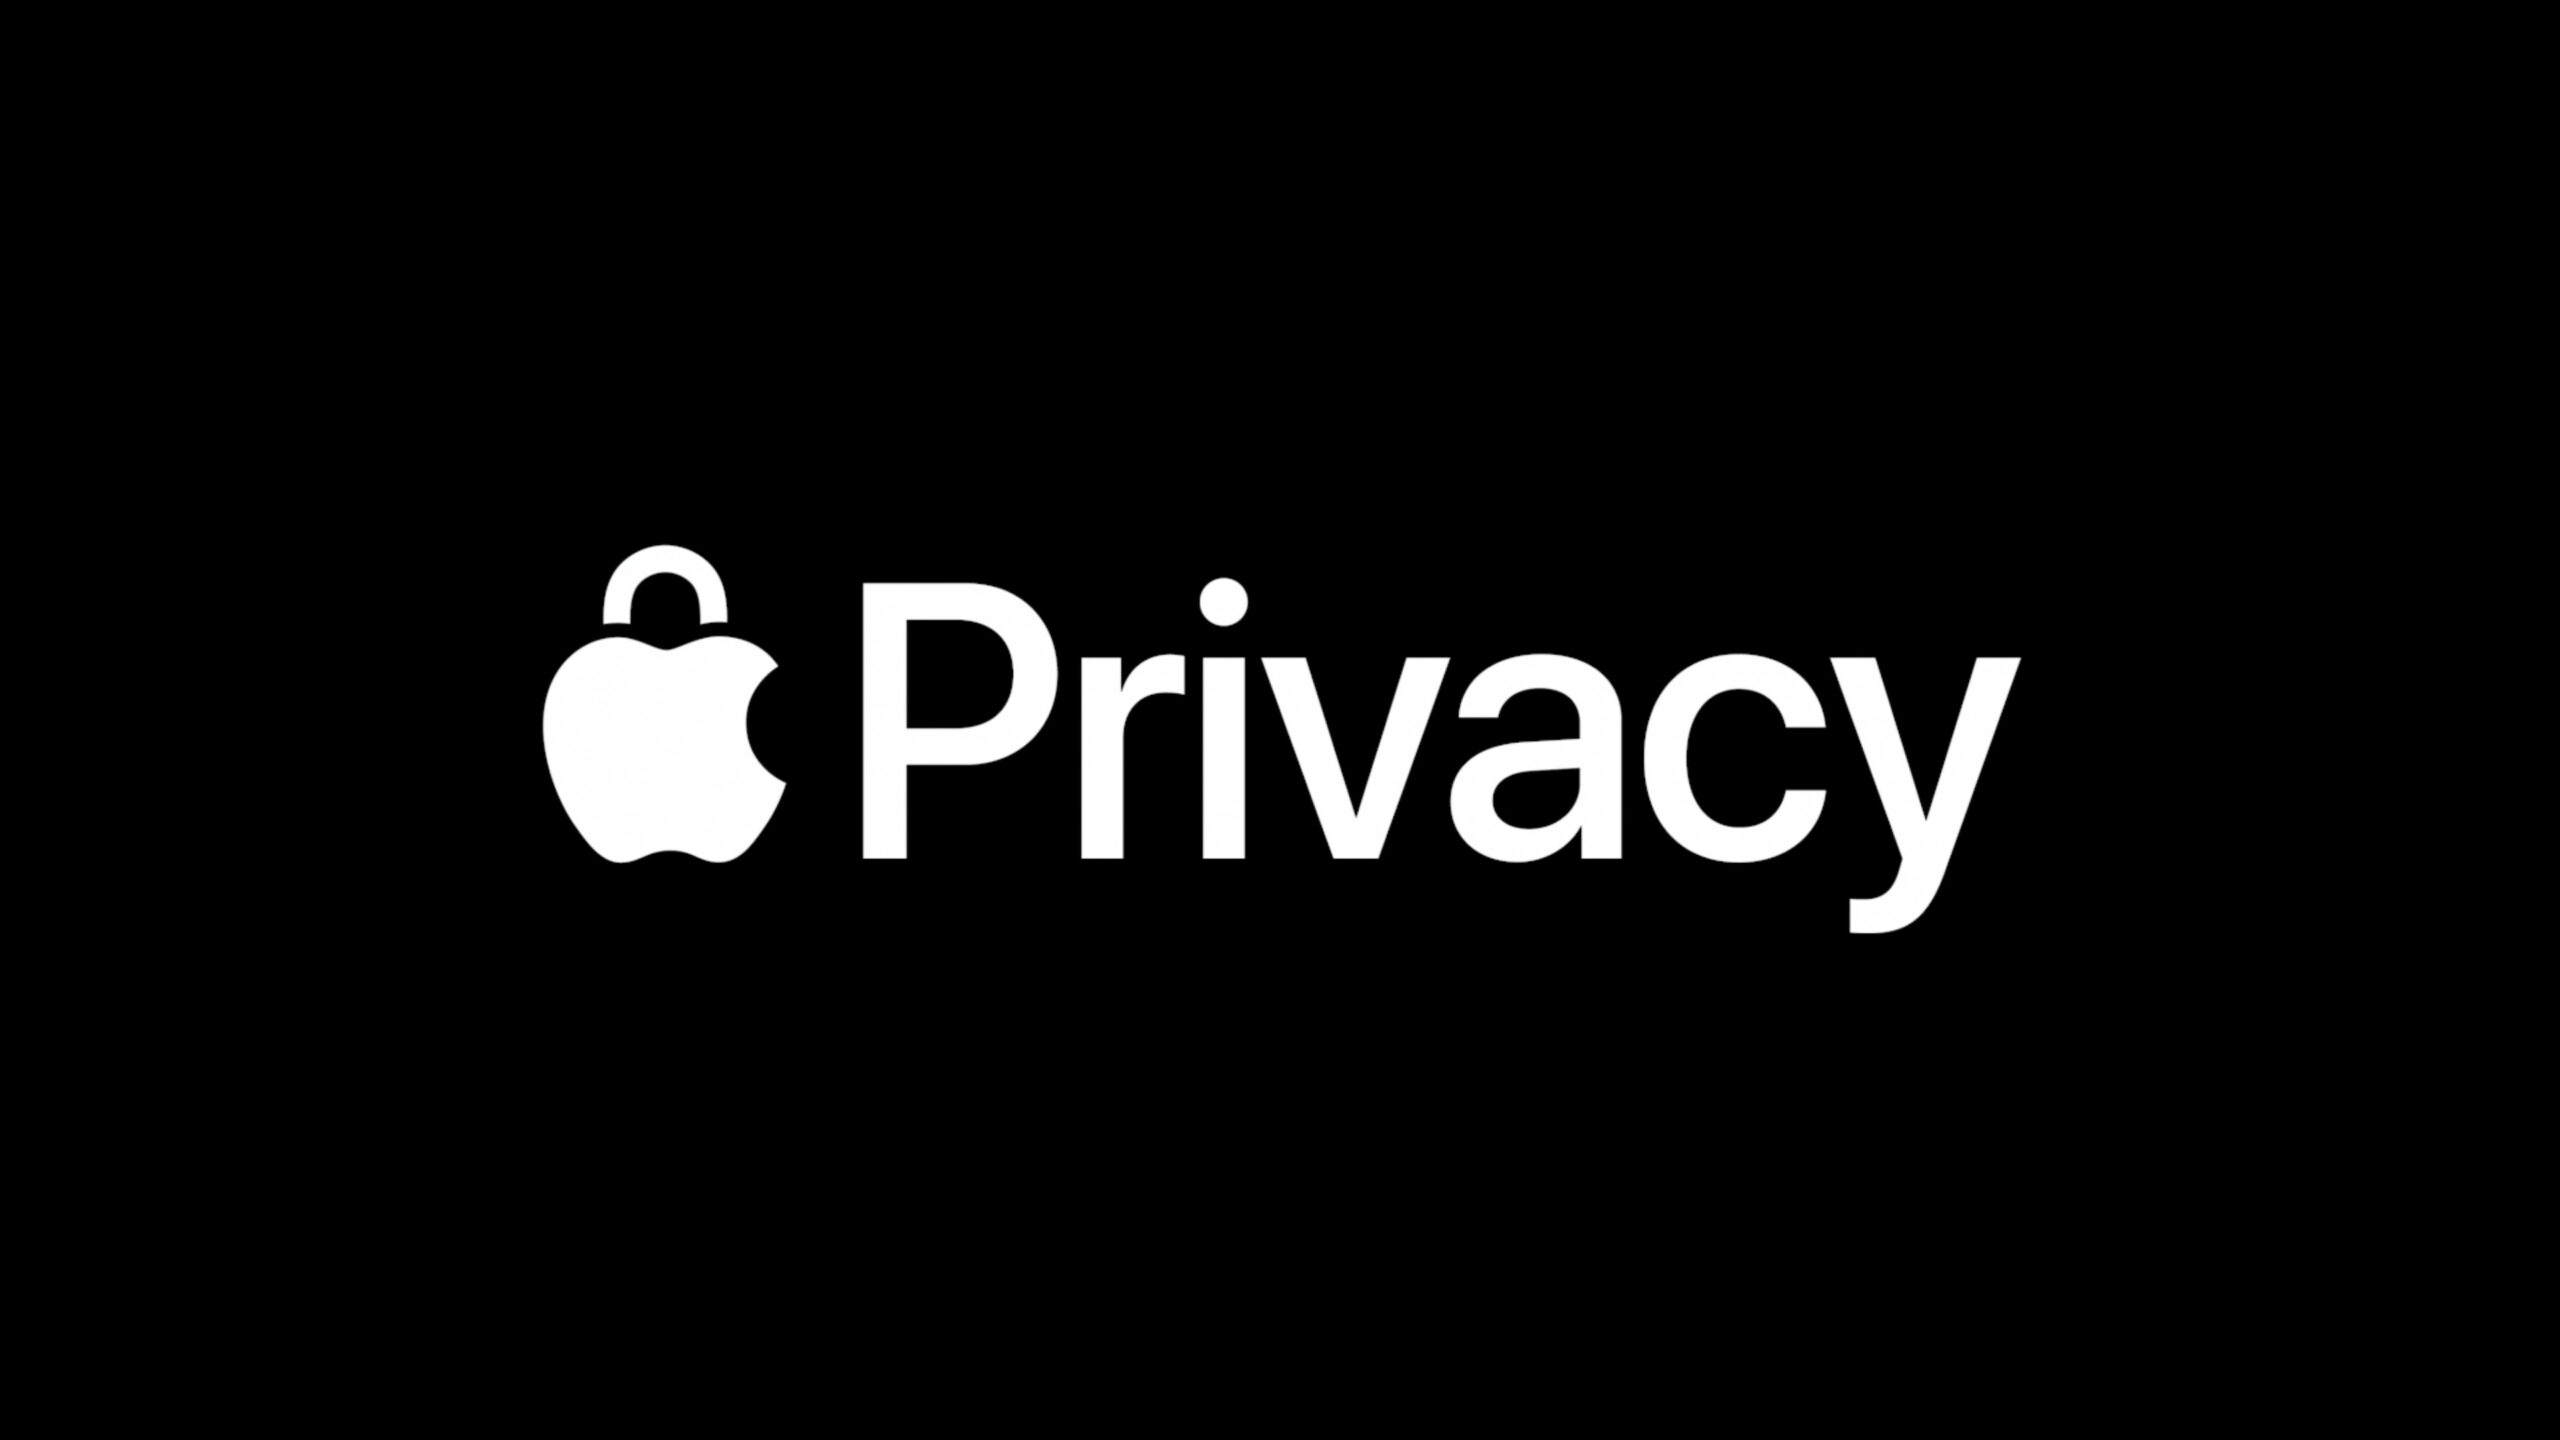 iOS 14 protects your privacy in important new ways